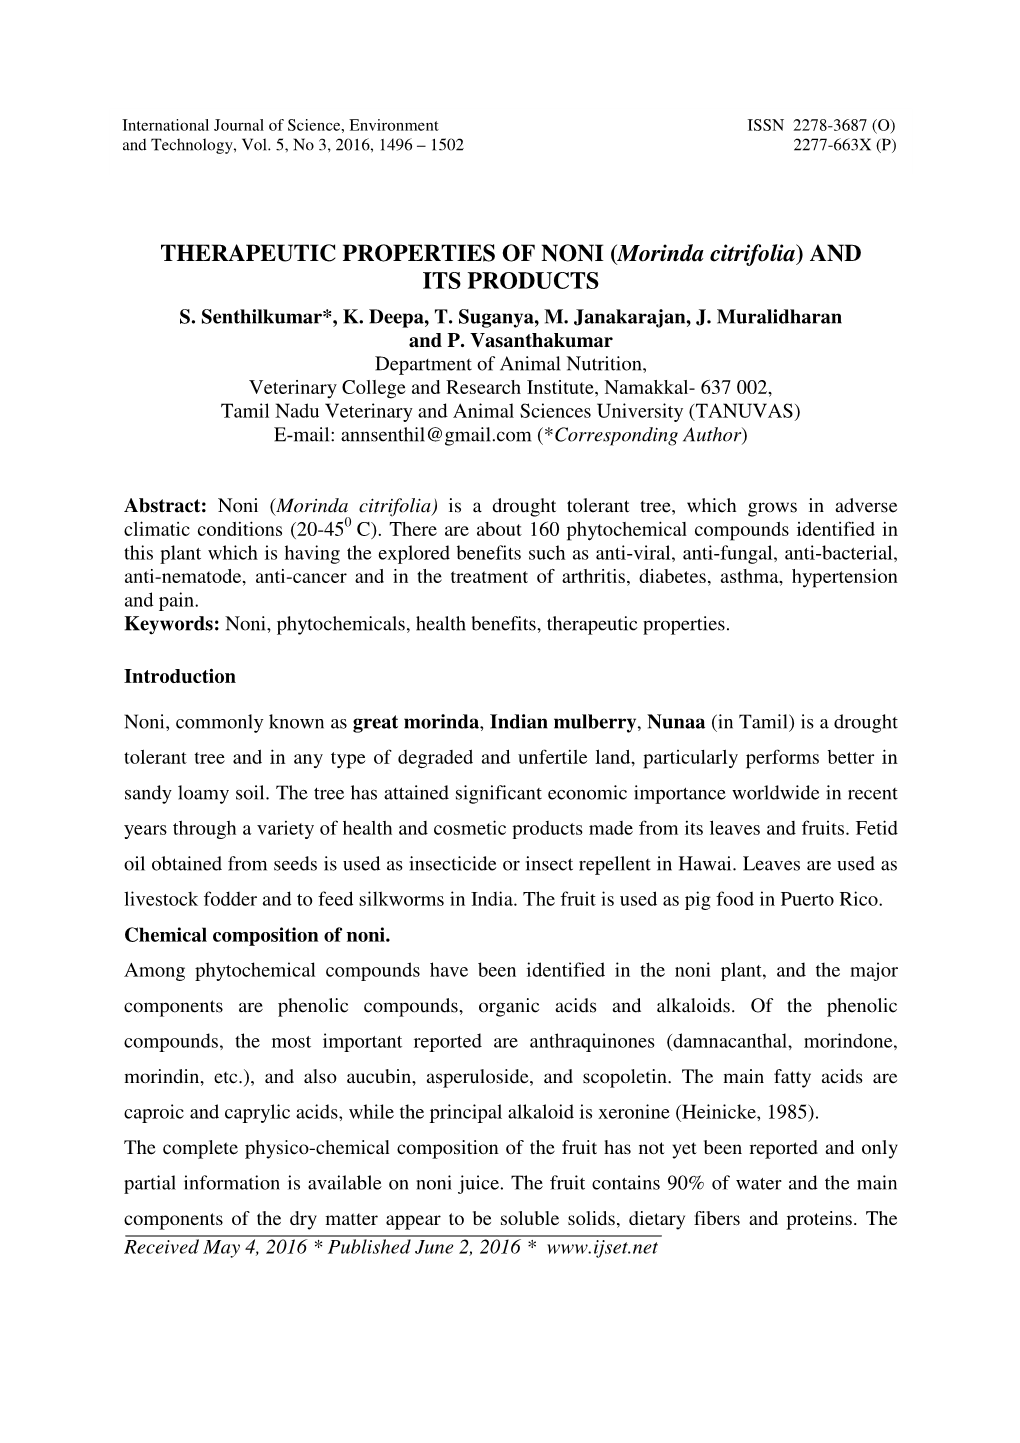 THERAPEUTIC PROPERTIES of NONI (Morinda Citrifolia) and ITS PRODUCTS S